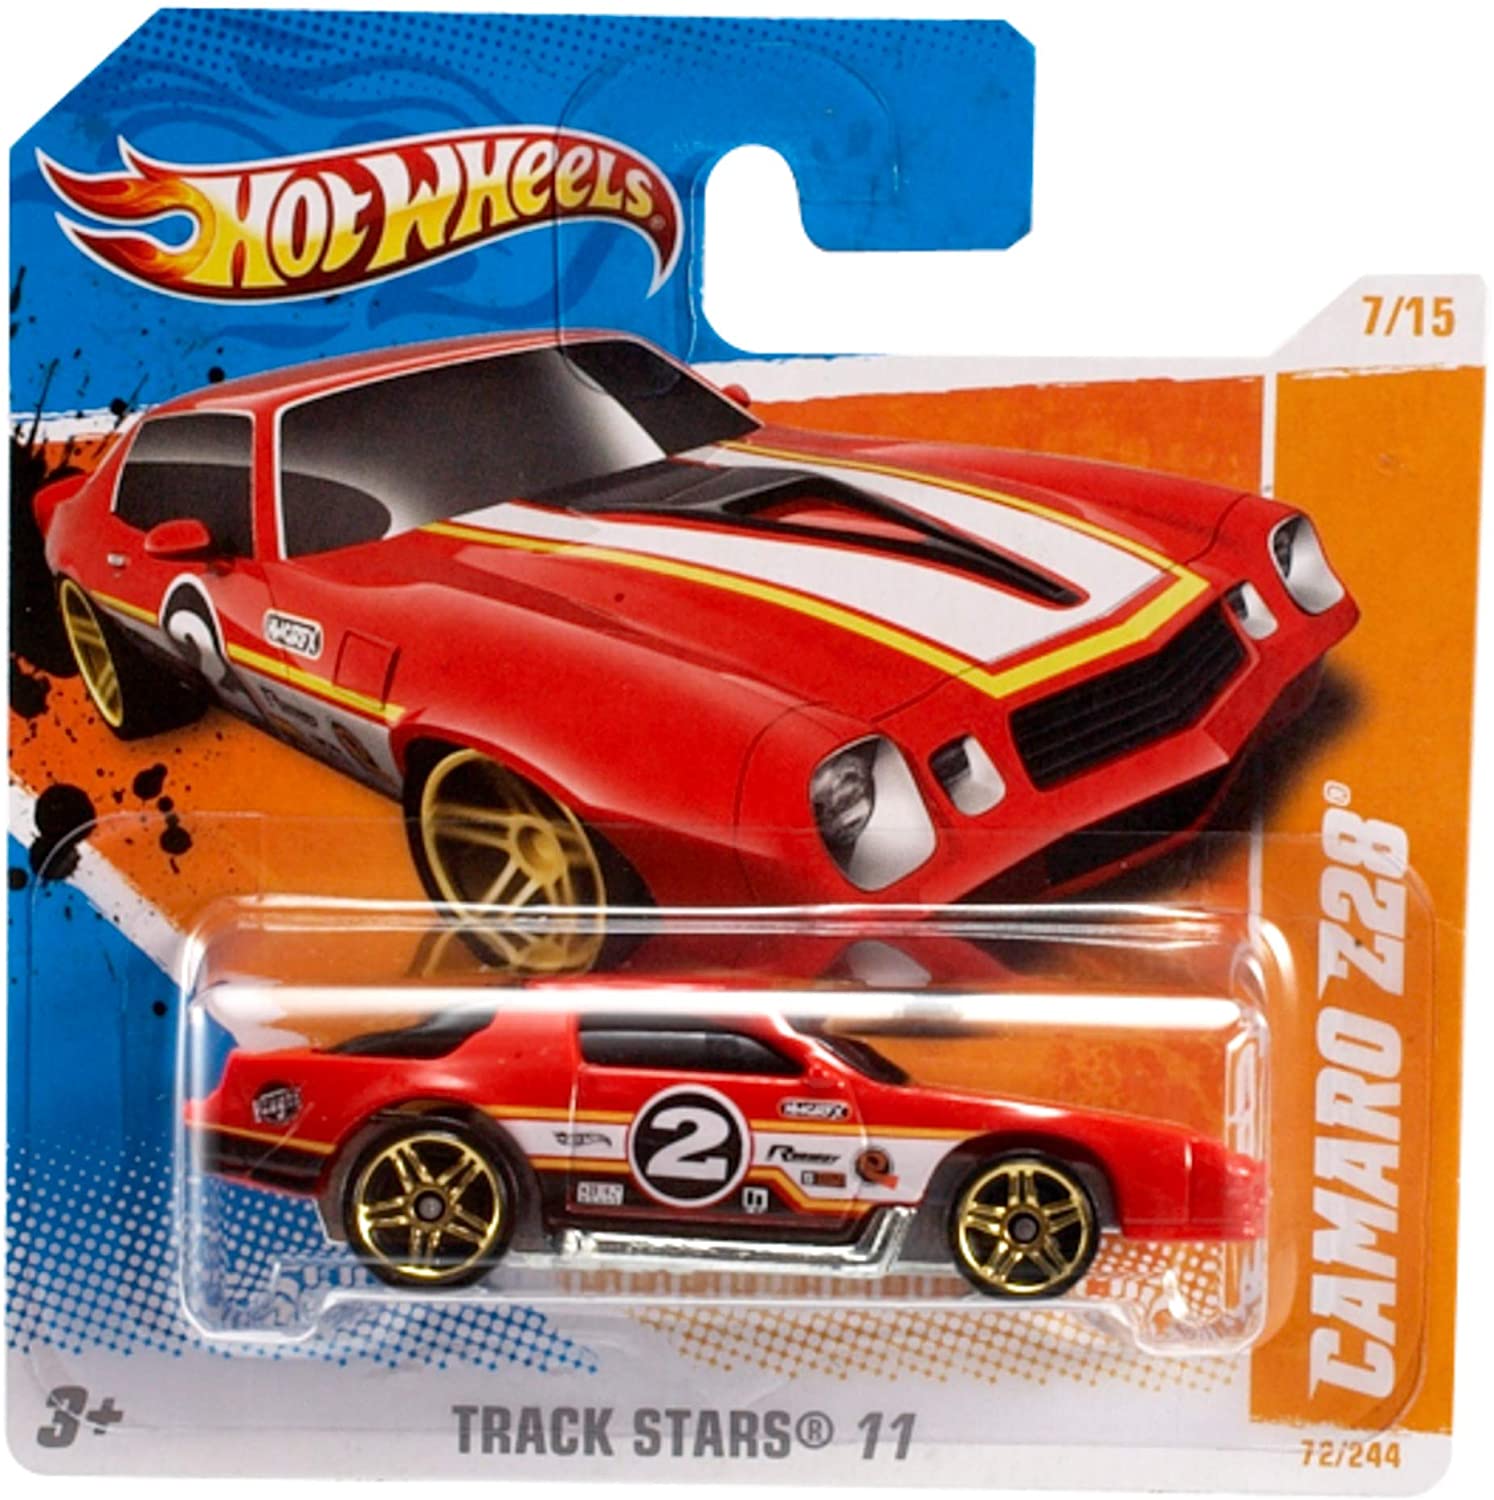 Mattel Hot Wheels 5785 1-Pack, 1 Vehicle Each, Random Selection (Sorted By 